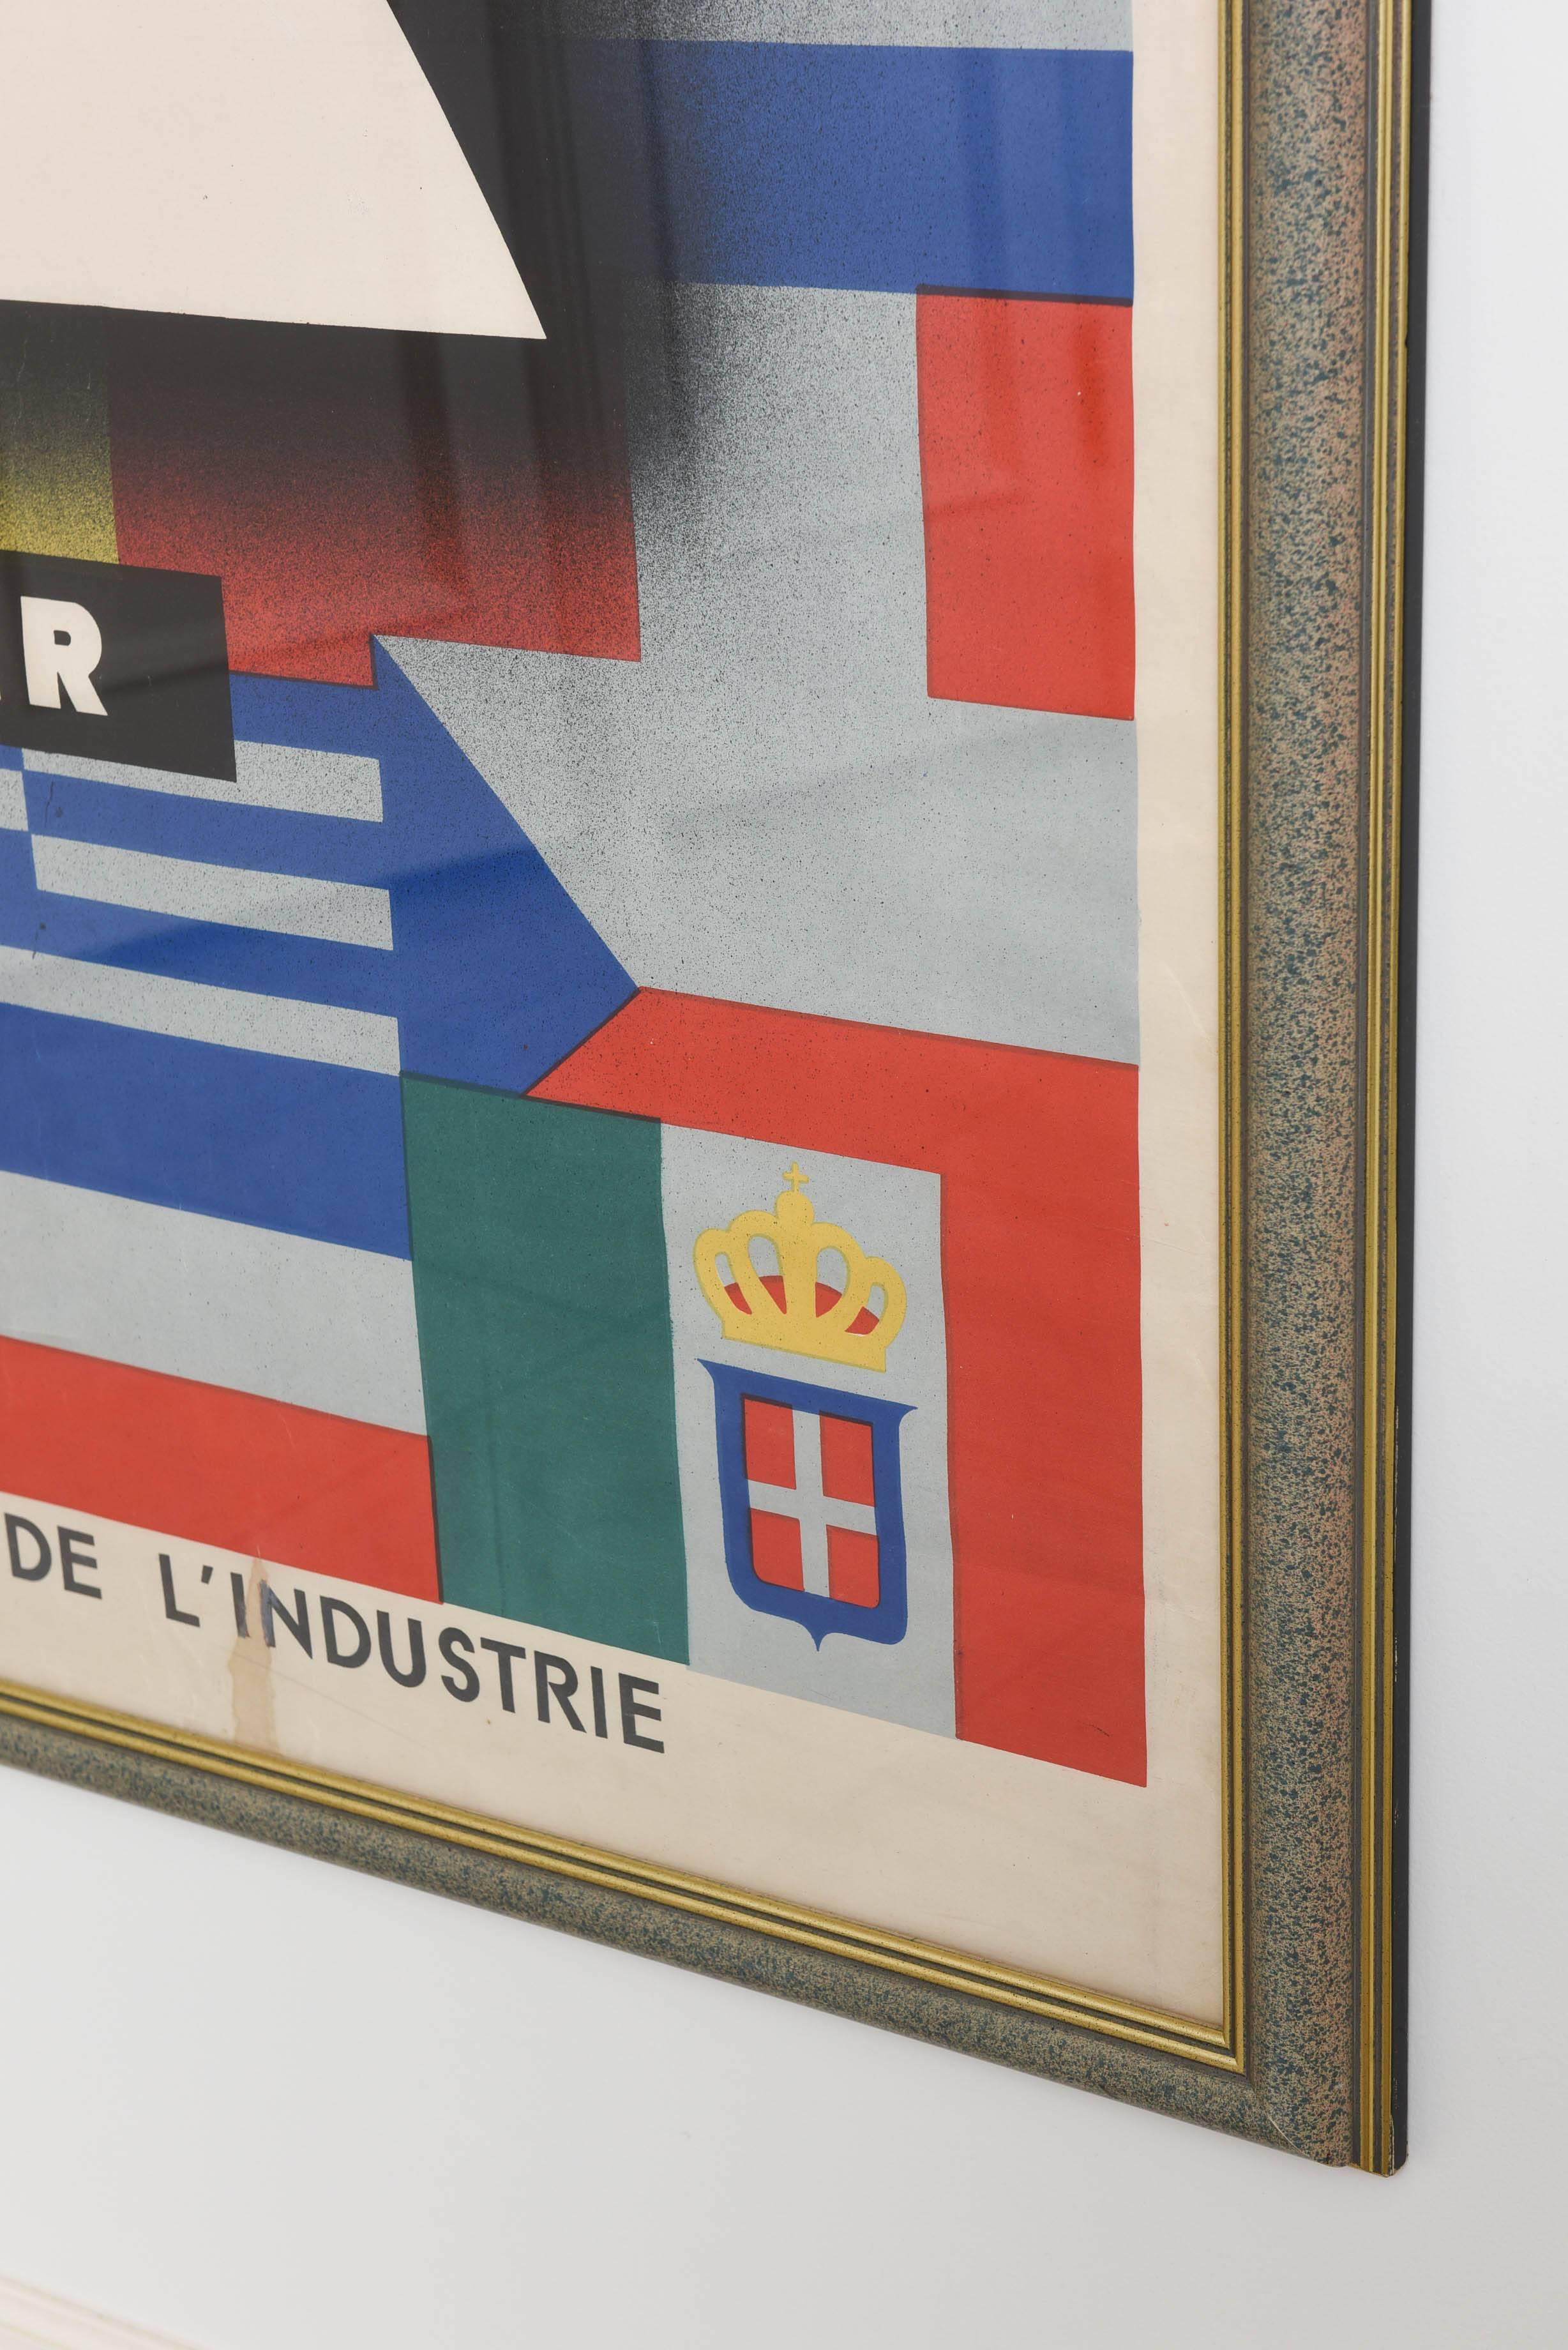 Rare large version of the 1937 exhibition poster designed by acclaimed Art Deco designer Jean Carlu and printed by Bedors & Cie, Paris. Condition: B+, some creasing and restoration. Dimensions are unframed.